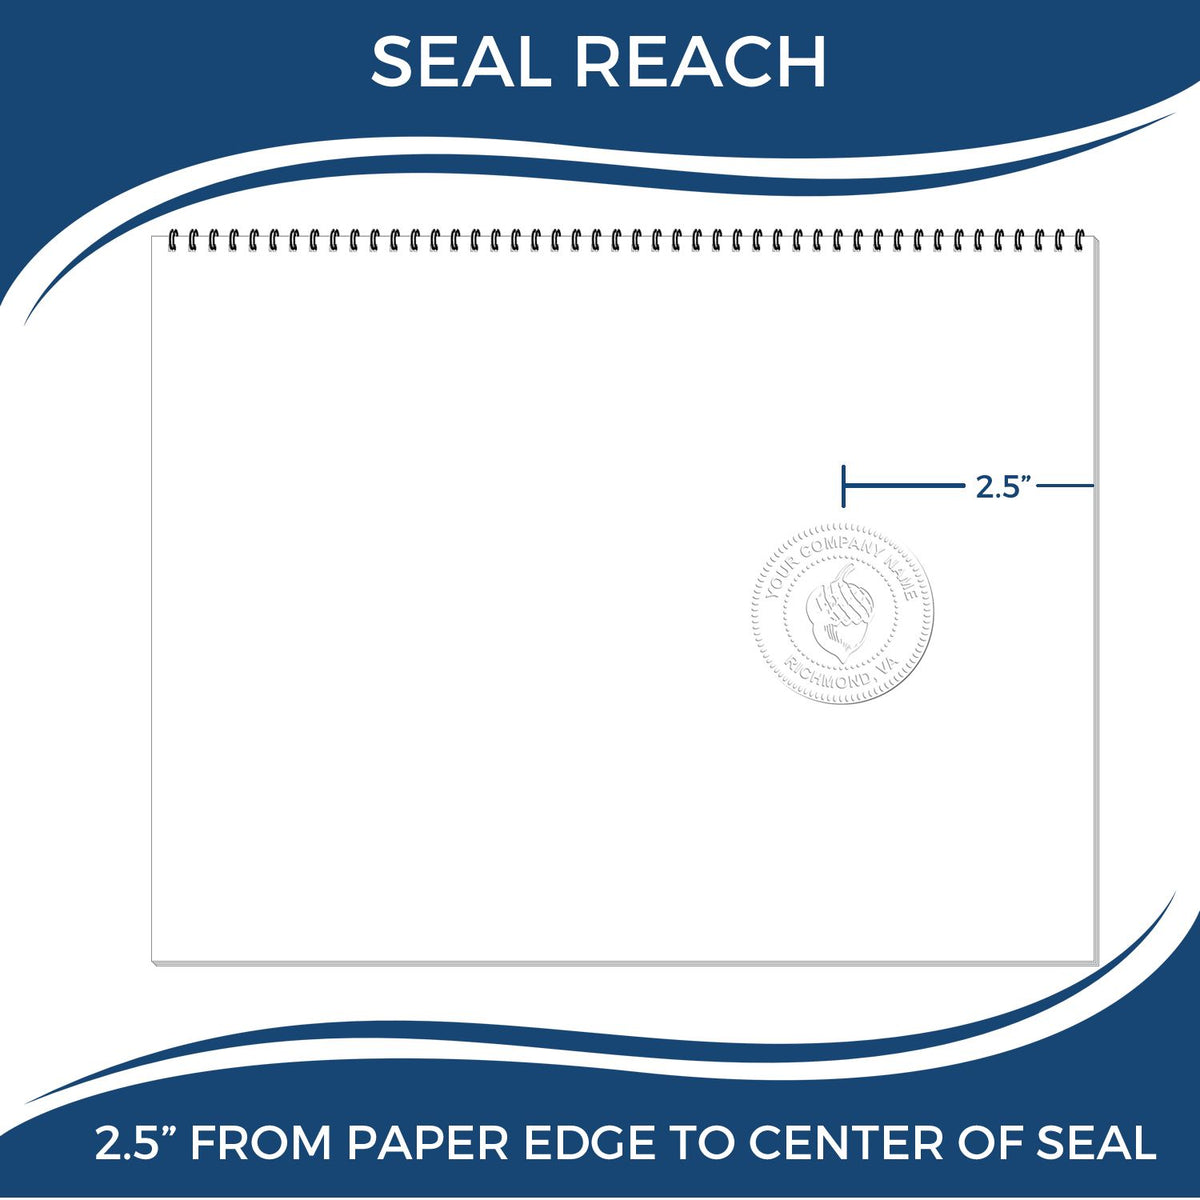 An infographic showing the seal reach which is represented by a ruler and a miniature seal image of the Heavy Duty Cast Iron Idaho Engineer Seal Embosser